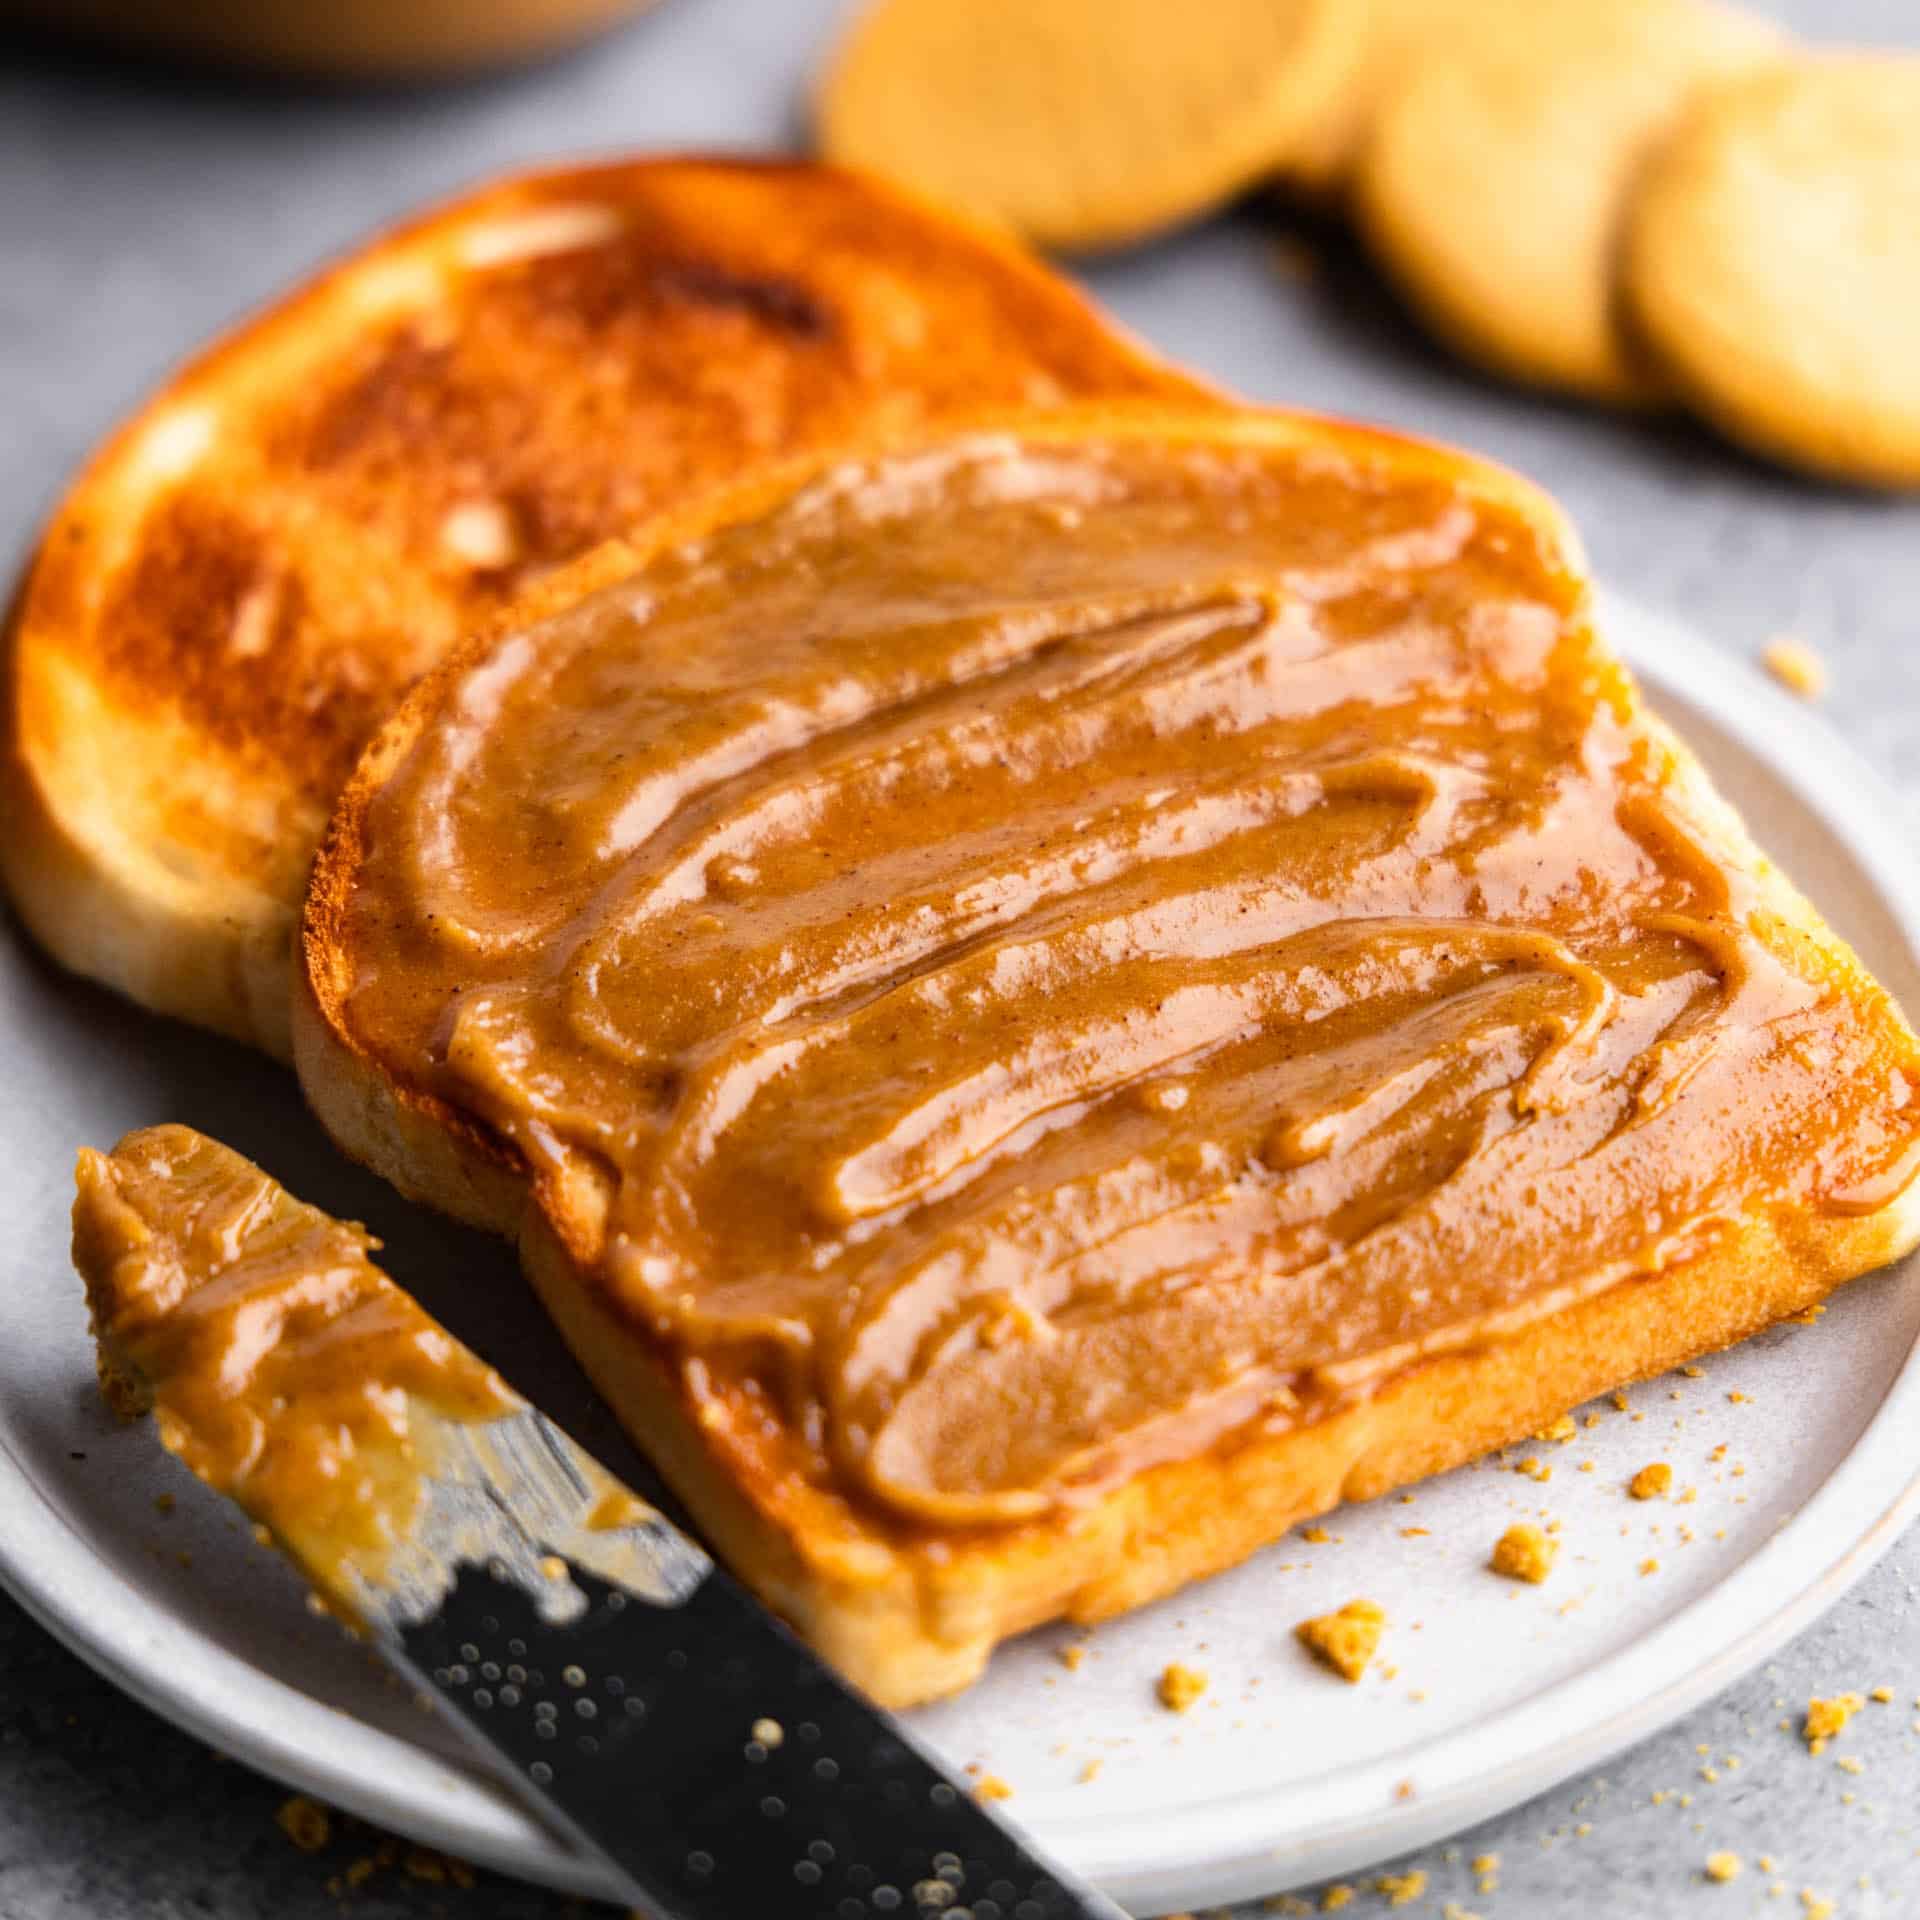 A close up view of two slices of toast on a plate with homemade cookie butter spread on top.